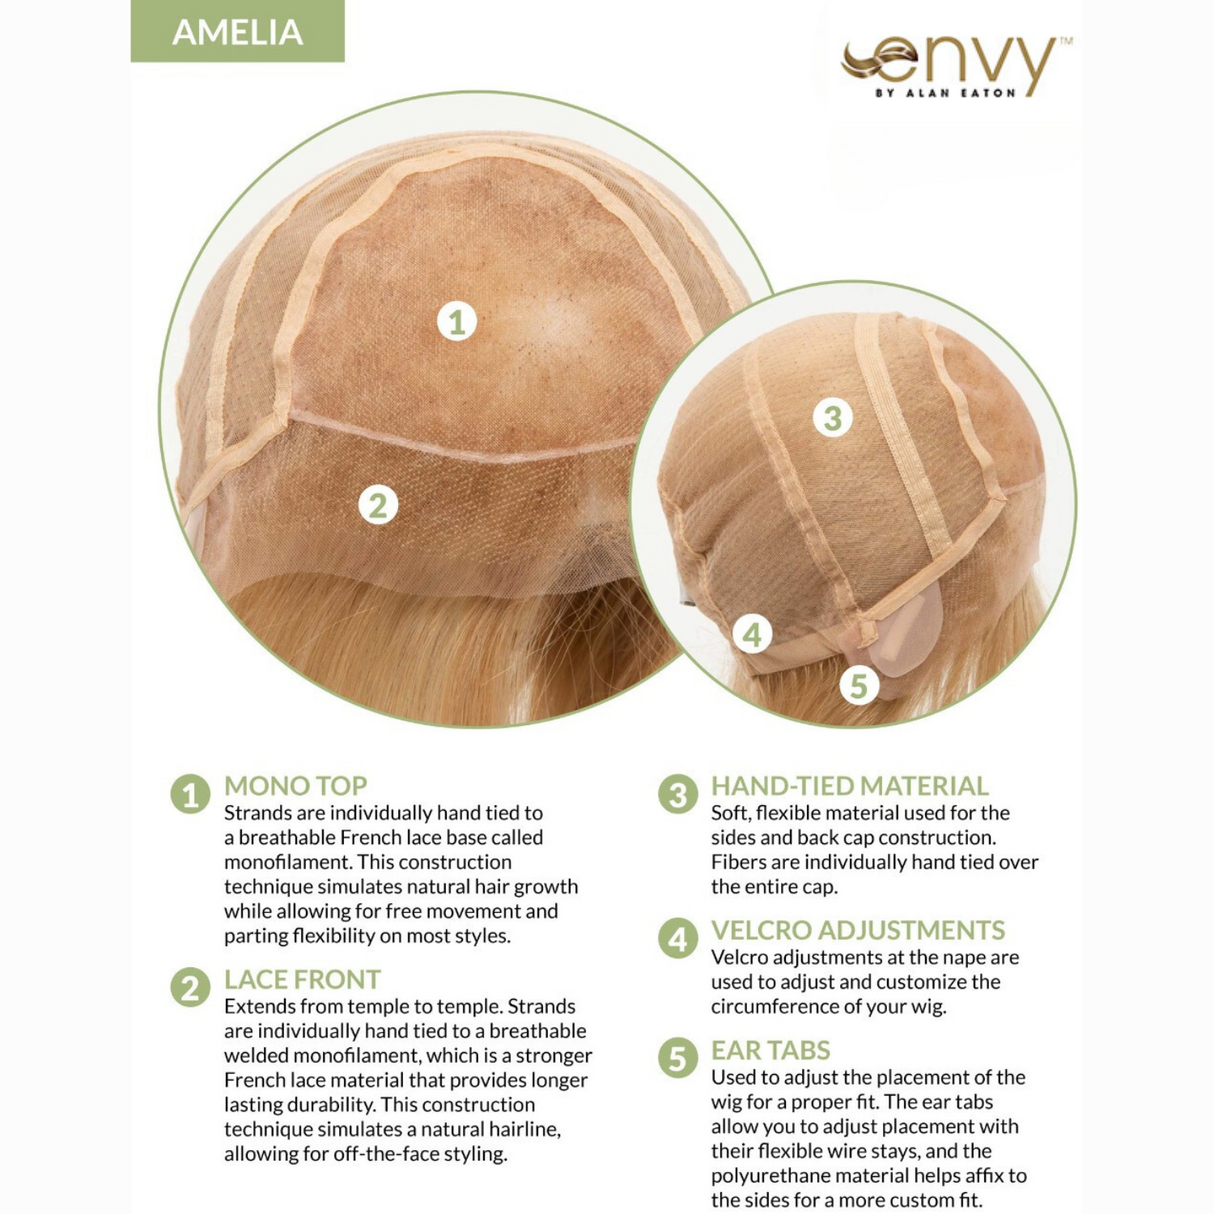 Amelia - Human Hair Collection by Envy